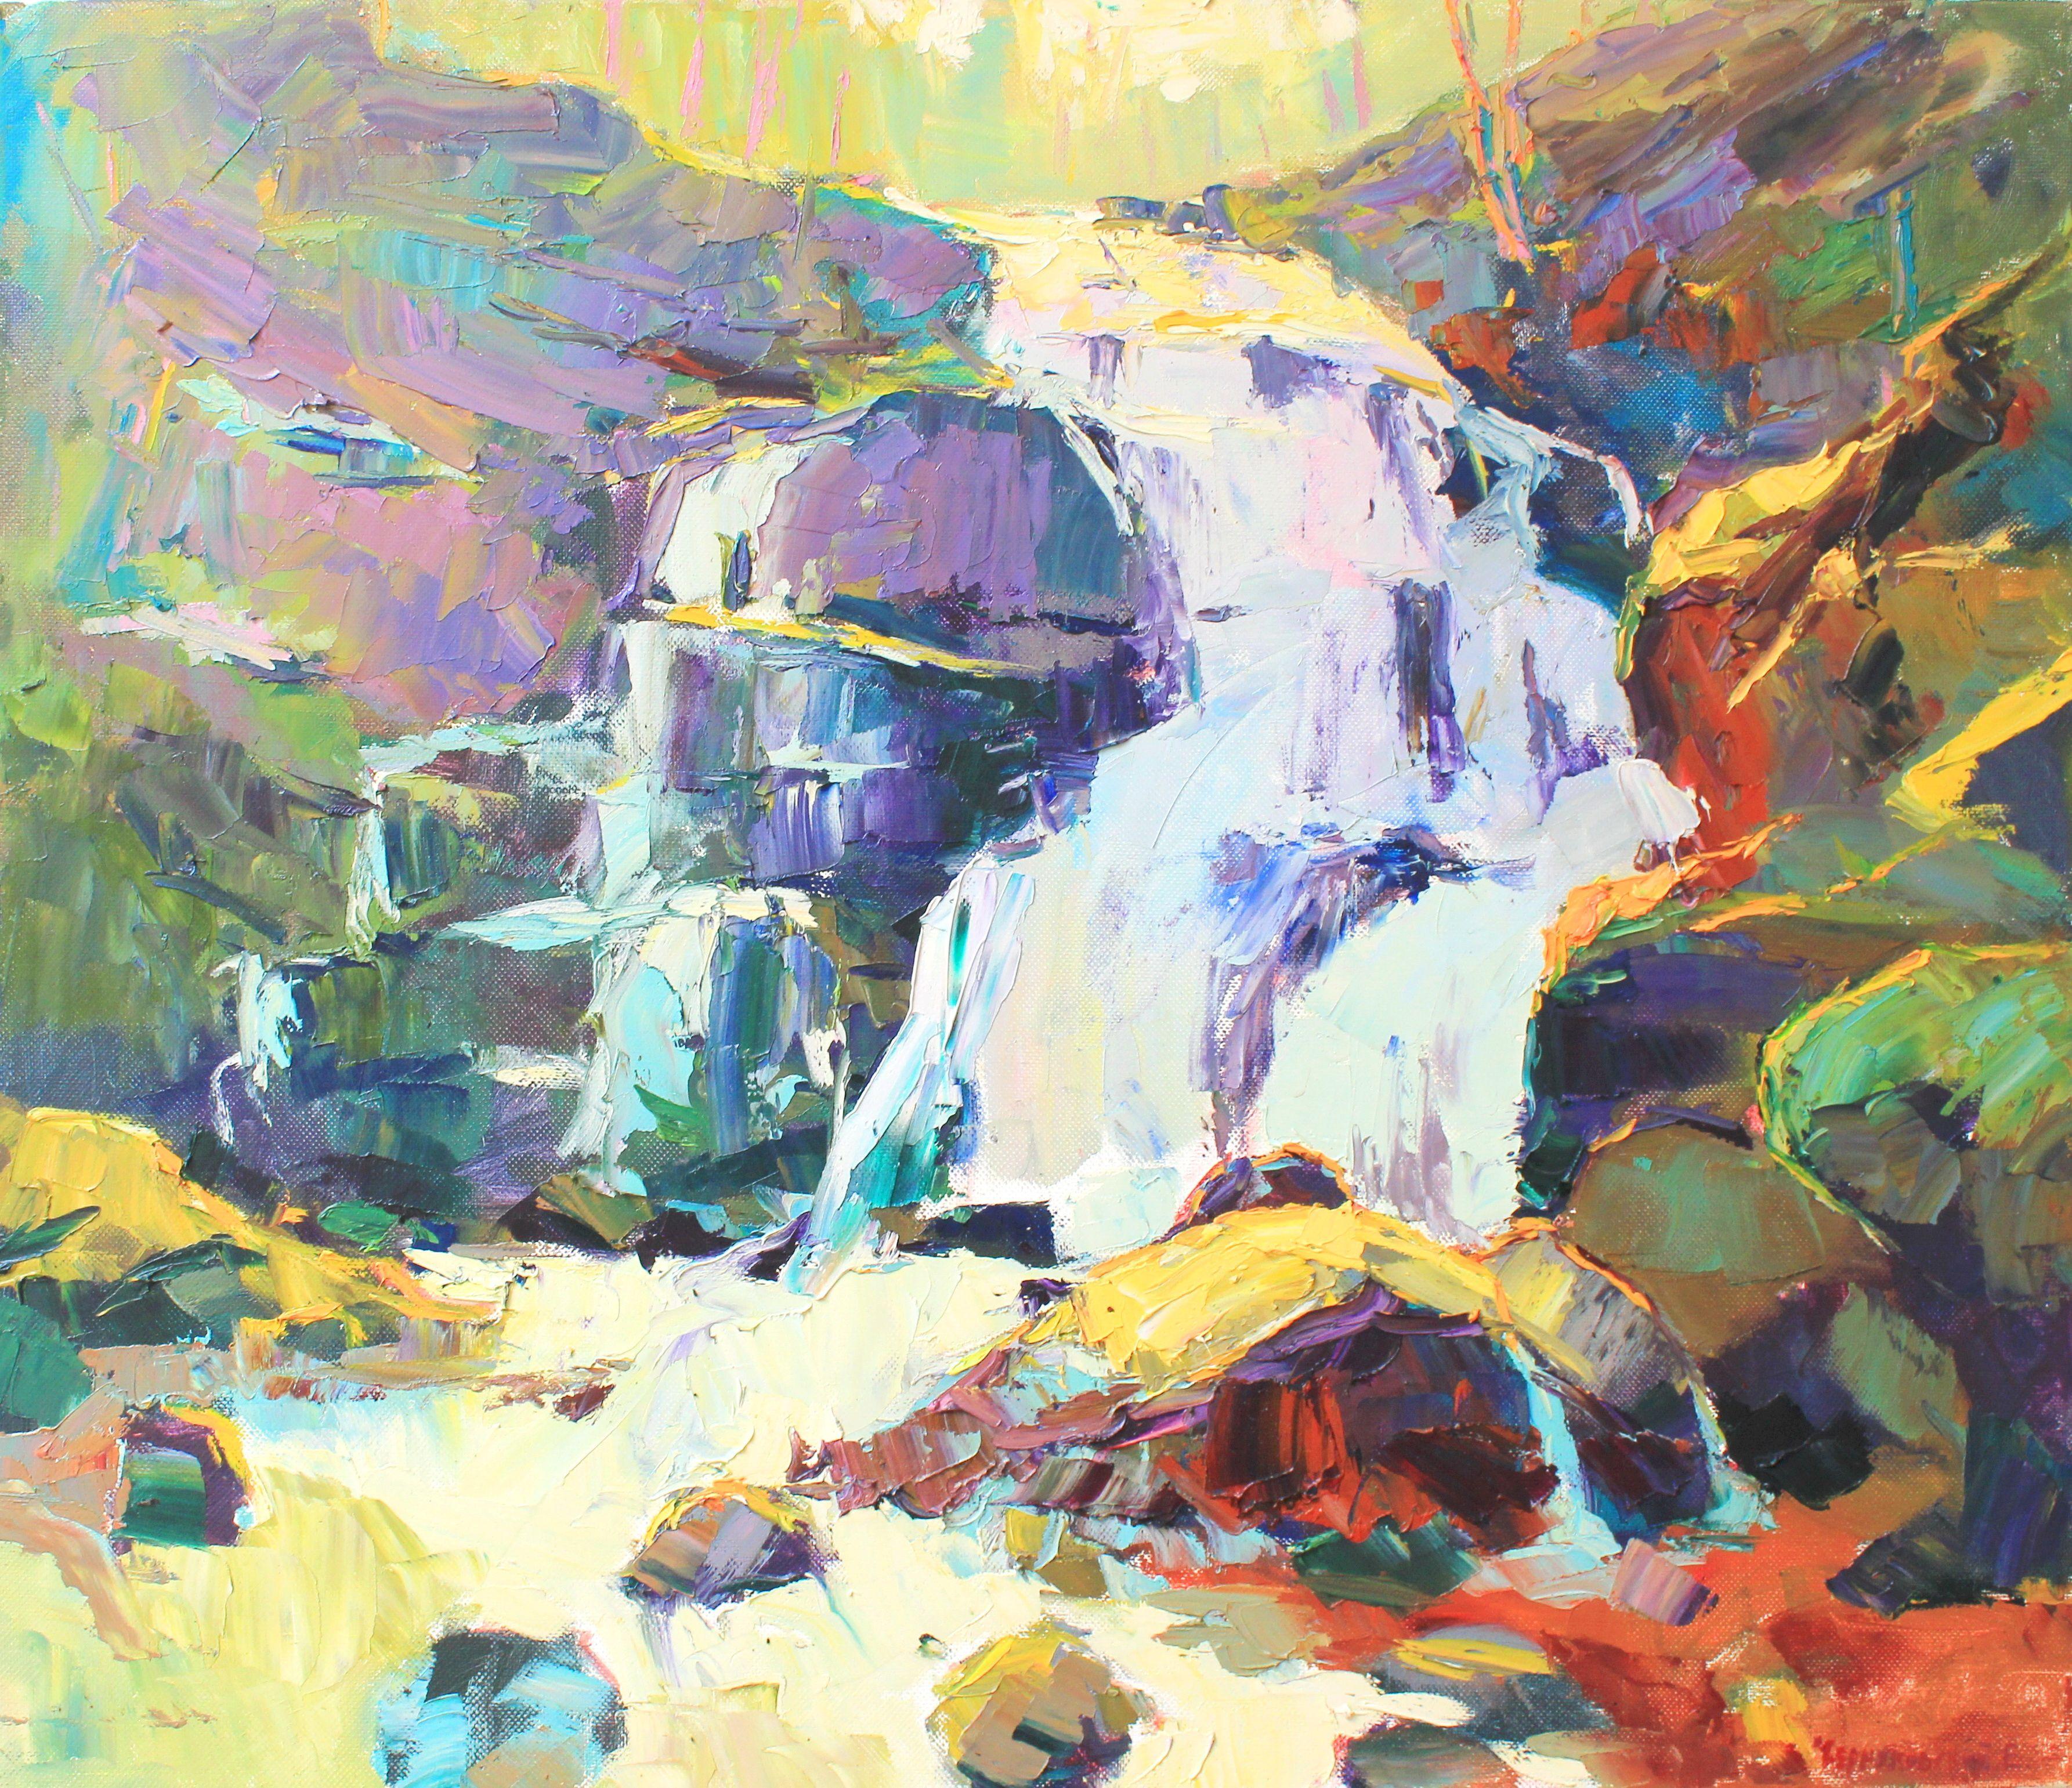 Original Oil painting by Ukrainian artist Evgeny Chernyakovsky    "Waterfall"  70.0 X 60.0 CM / 27.5 X 23.6 IN  HIGH QUALITY oil on canvas  Signed on the front and back  Dated 2020  Good condition  GUARANTEE OF AUTHENTICITY :: Painting ::